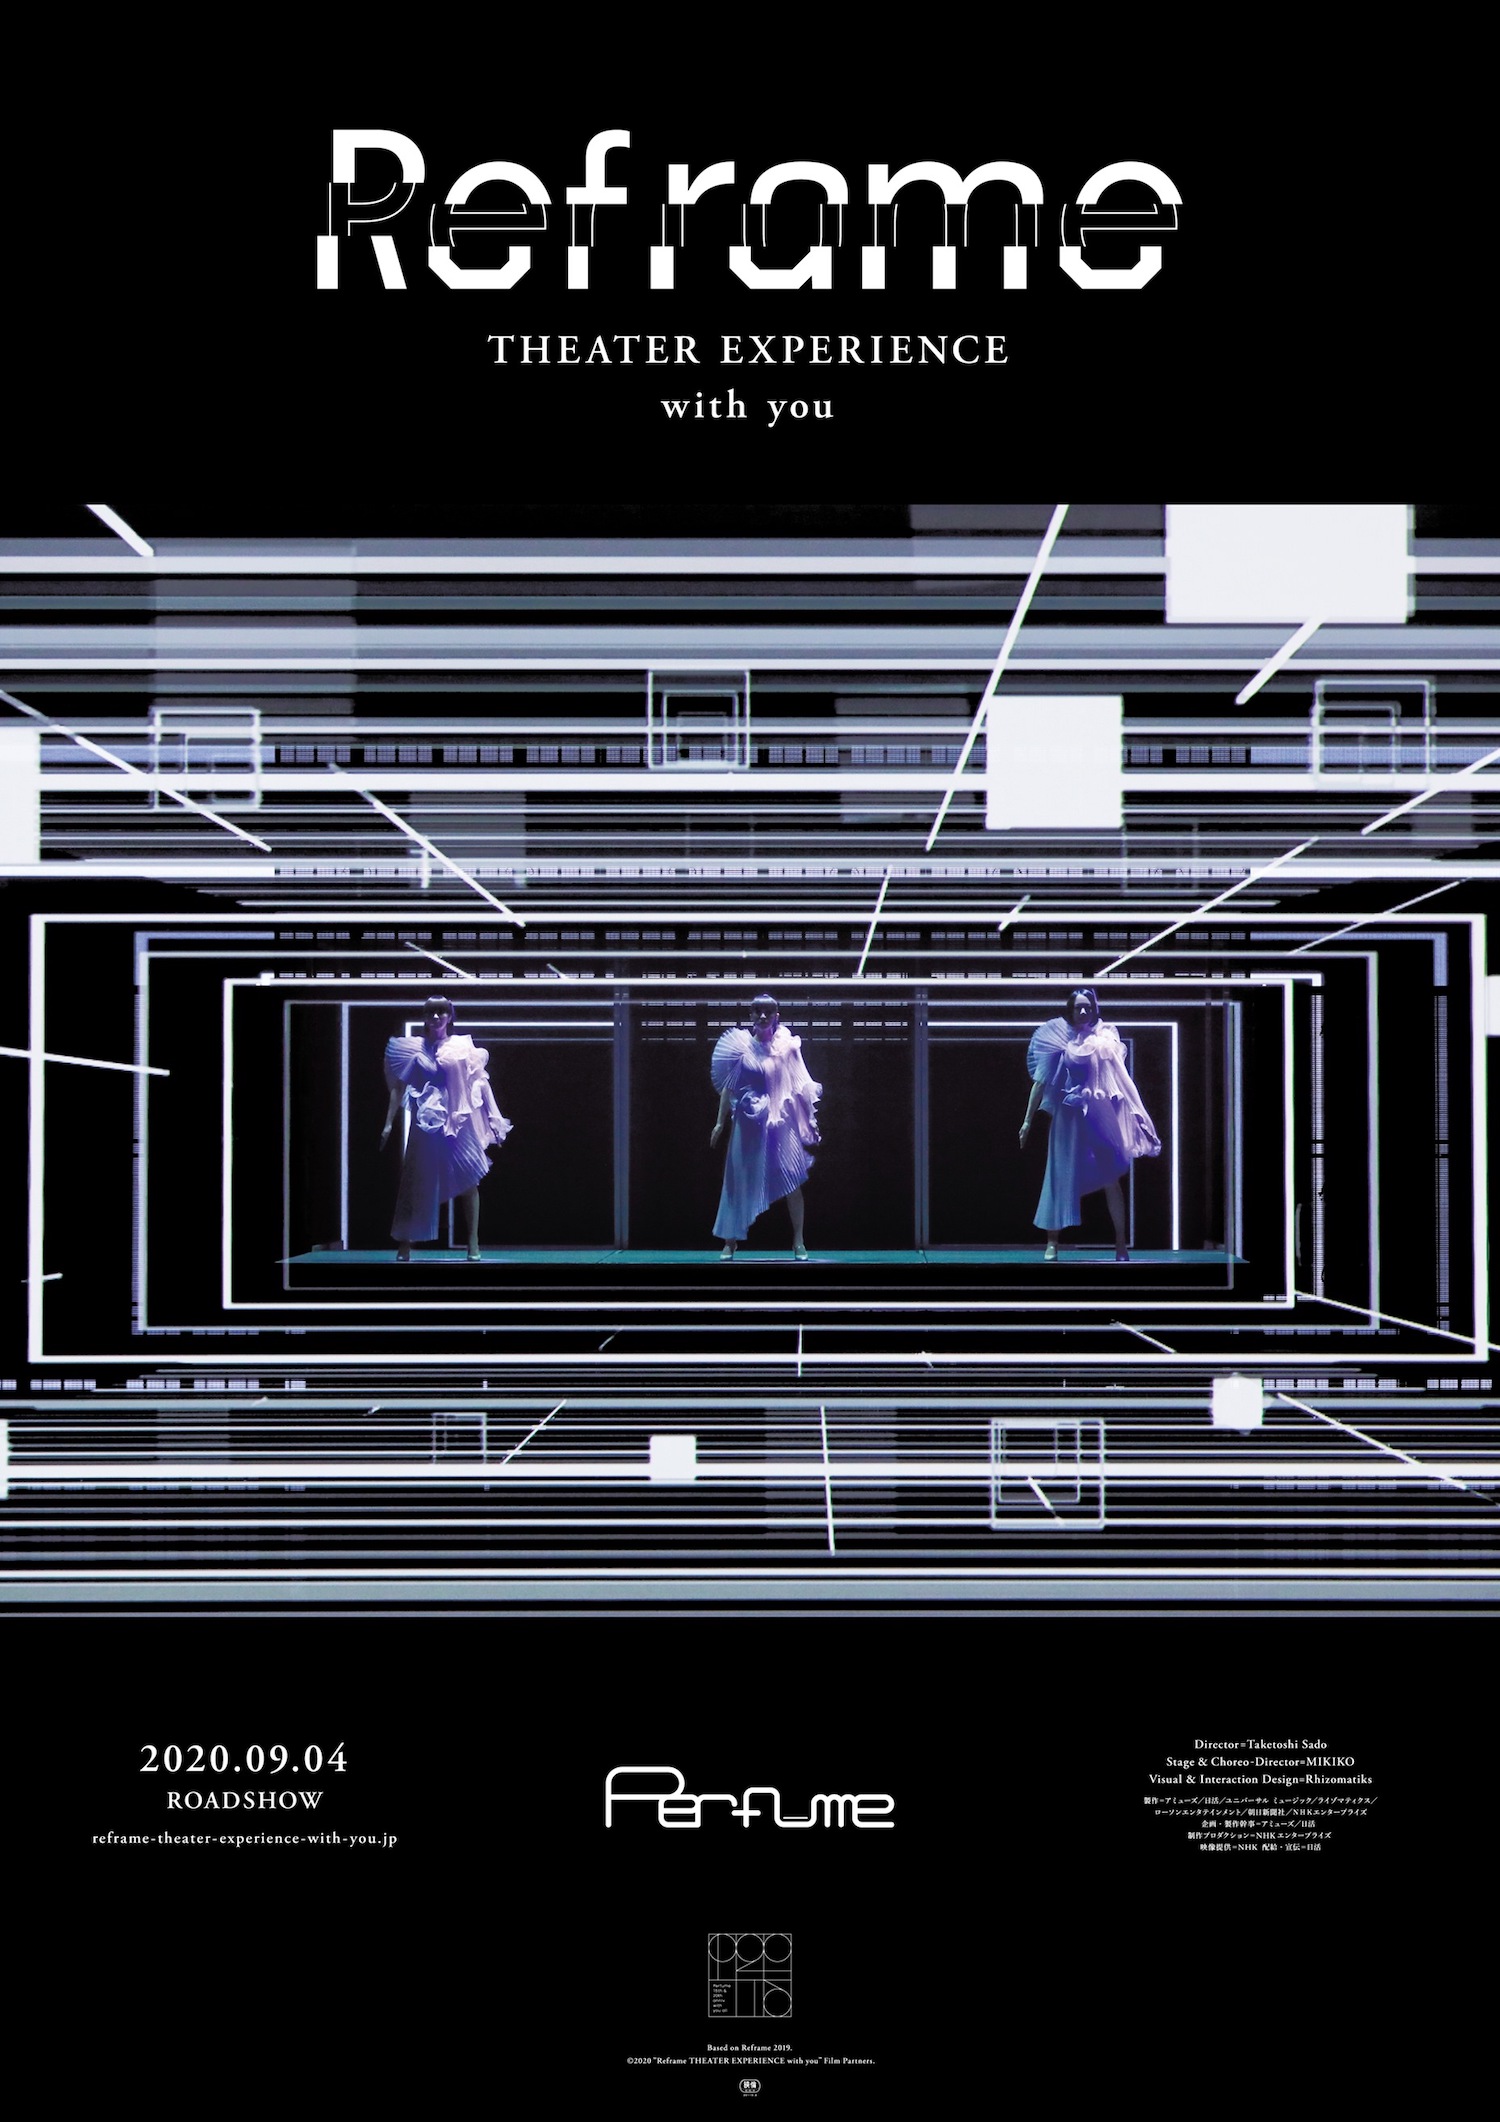 Perfume結成20年＆メジャーデビュー15周年／映画『Reframe THEATER EXPERIENCE with you』